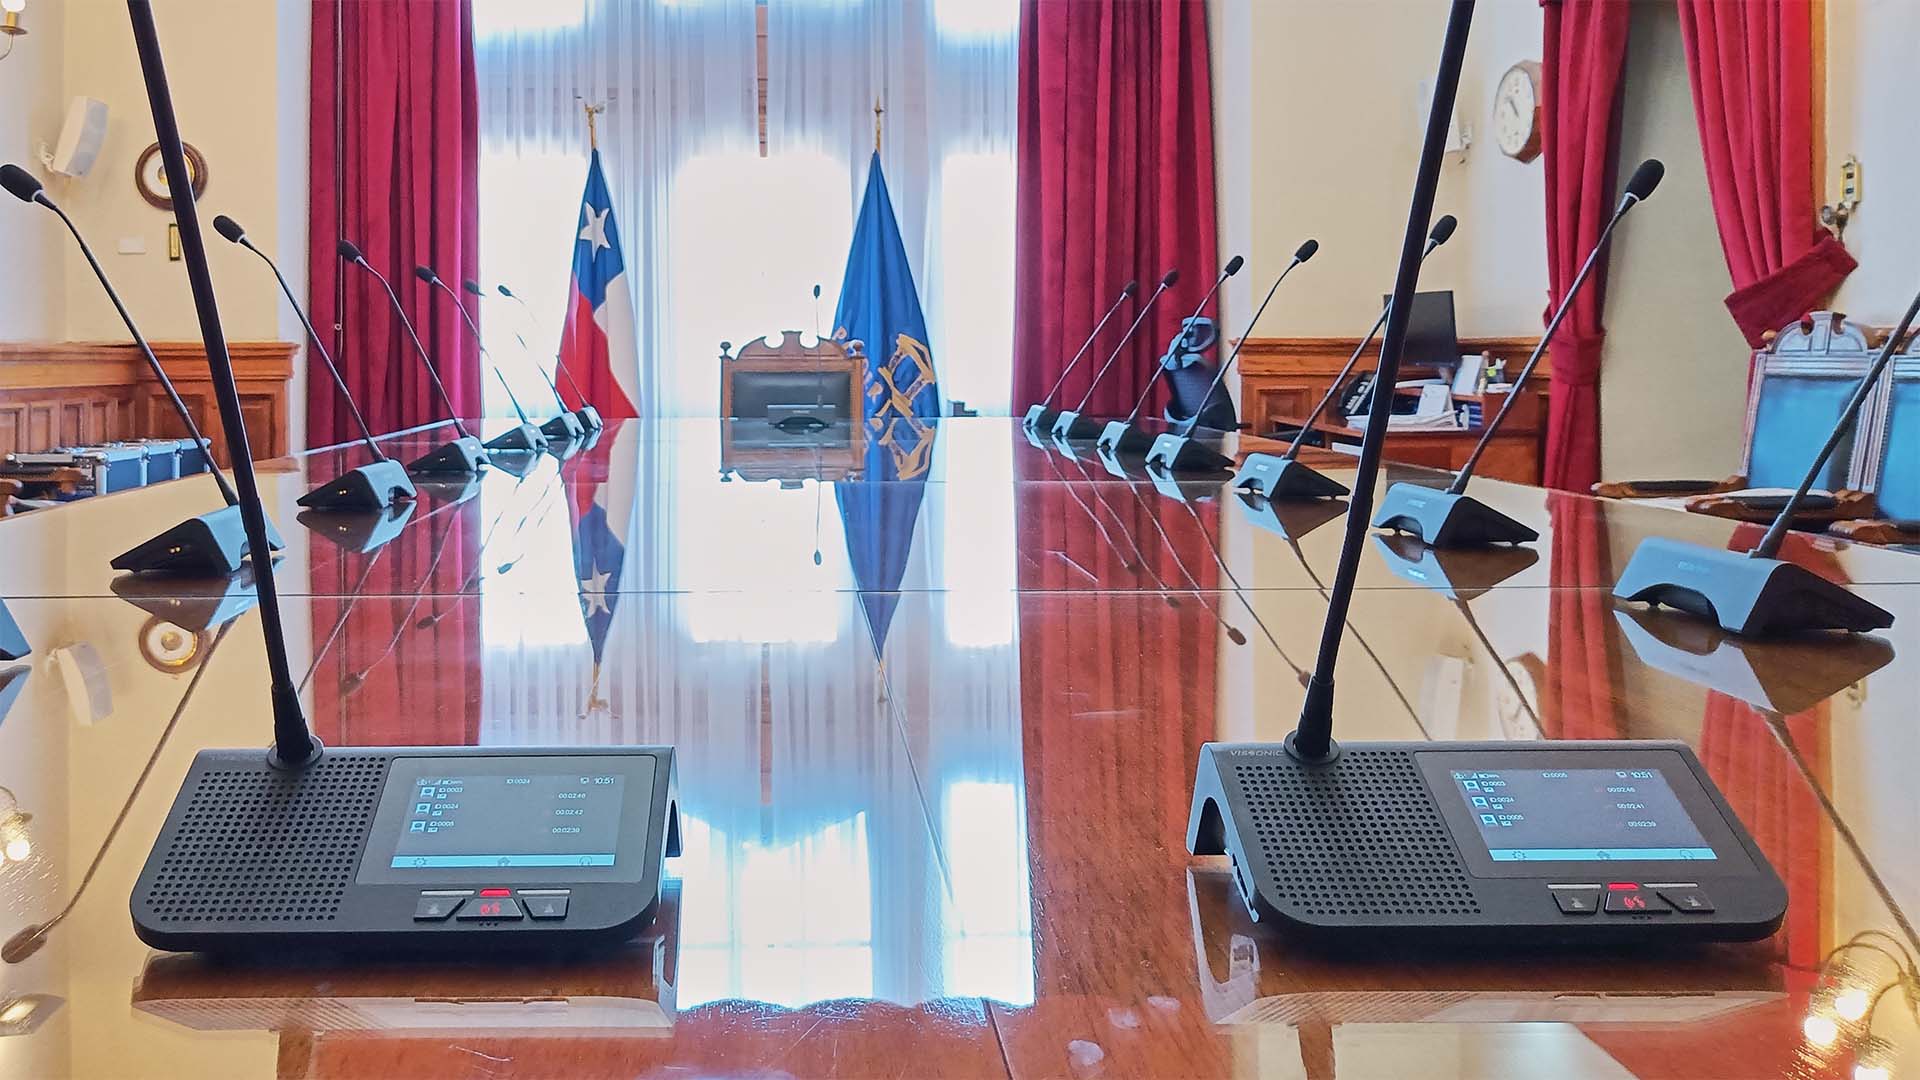 Wifi Wireless Multimedia Conference System in The Supreme Court of Justice in Chile